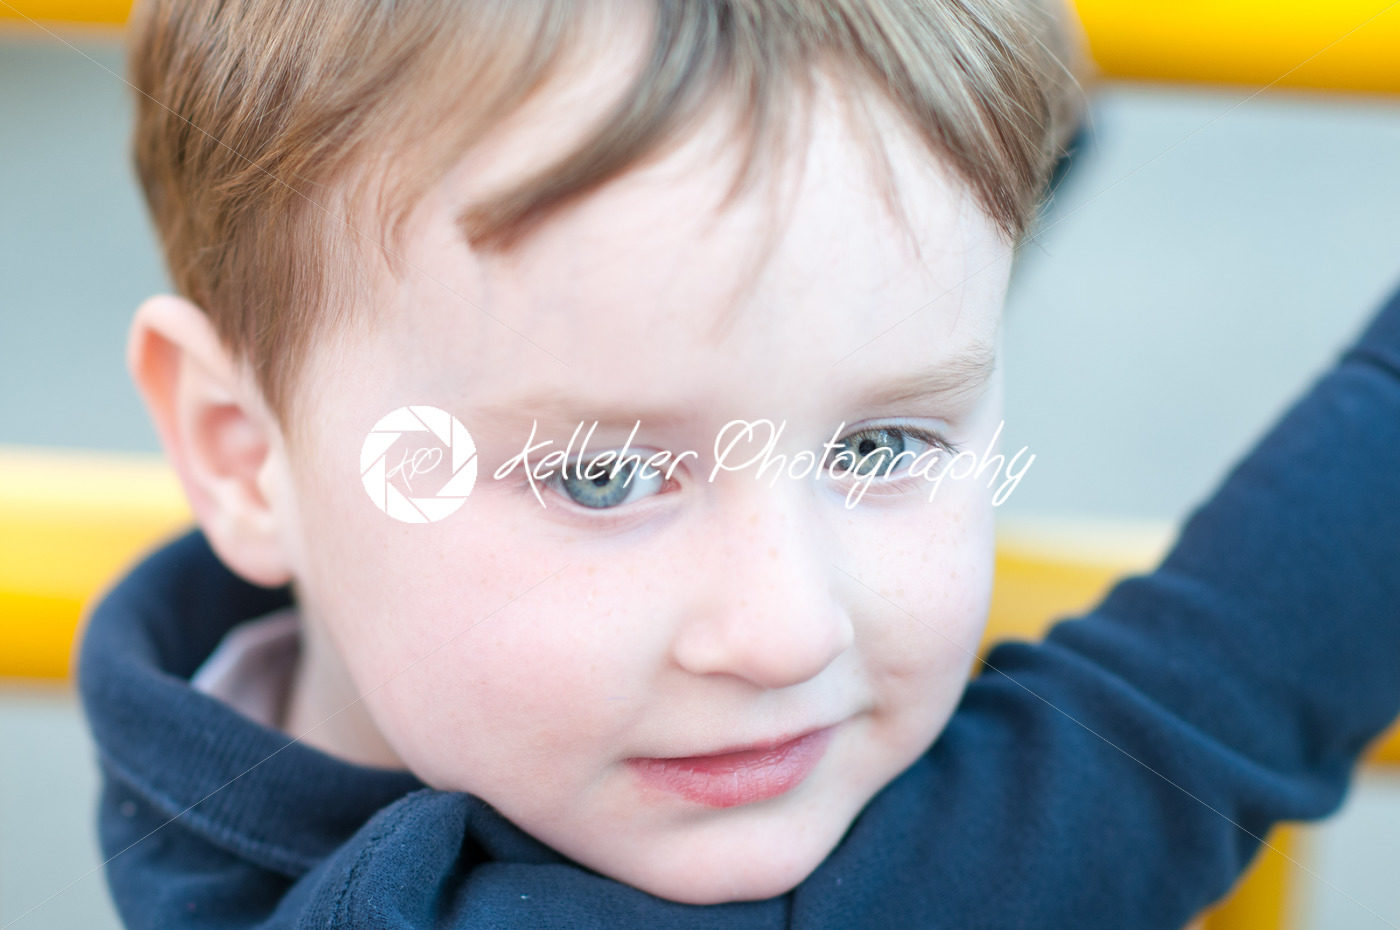 Close up Portrait of young boy outside - Kelleher Photography Store